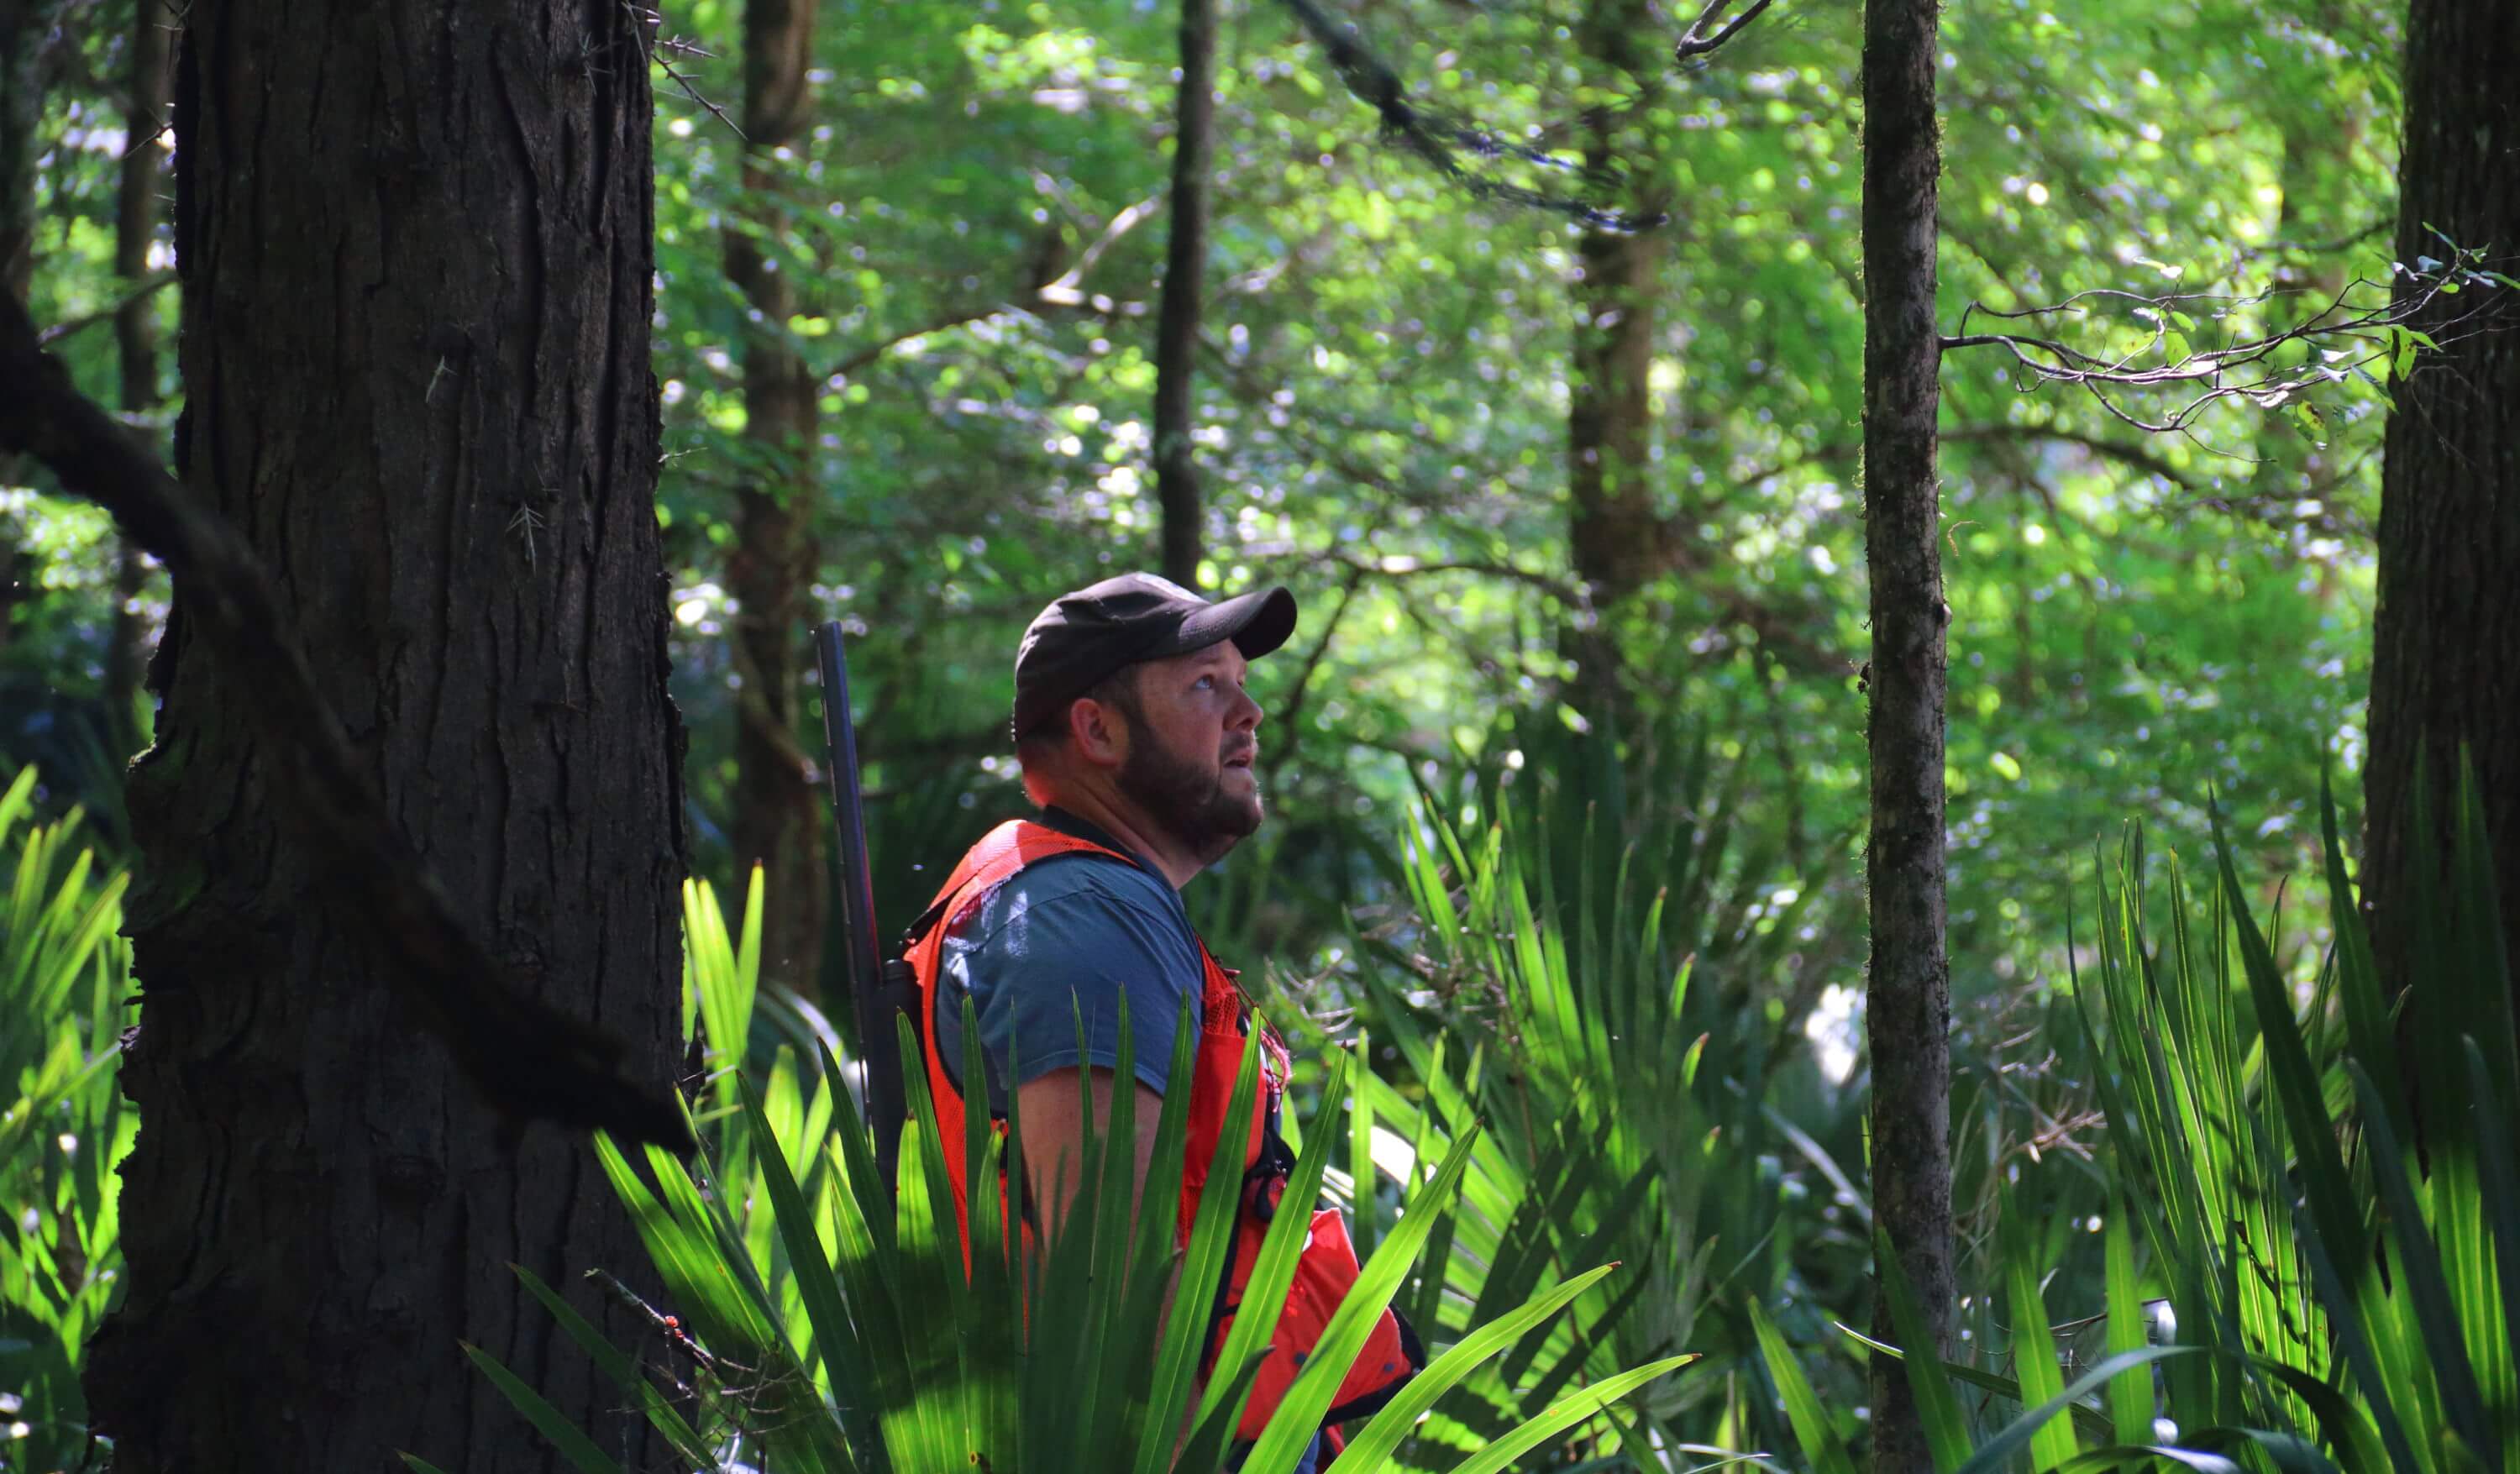 I explored McGill Bend Forest with Nathan Renick, forester for Tensas River National Wildlife Refuge in Louisiana. Tensas is home to one of the wildest patches of forest in the South. Photo by Bruce Beehler.